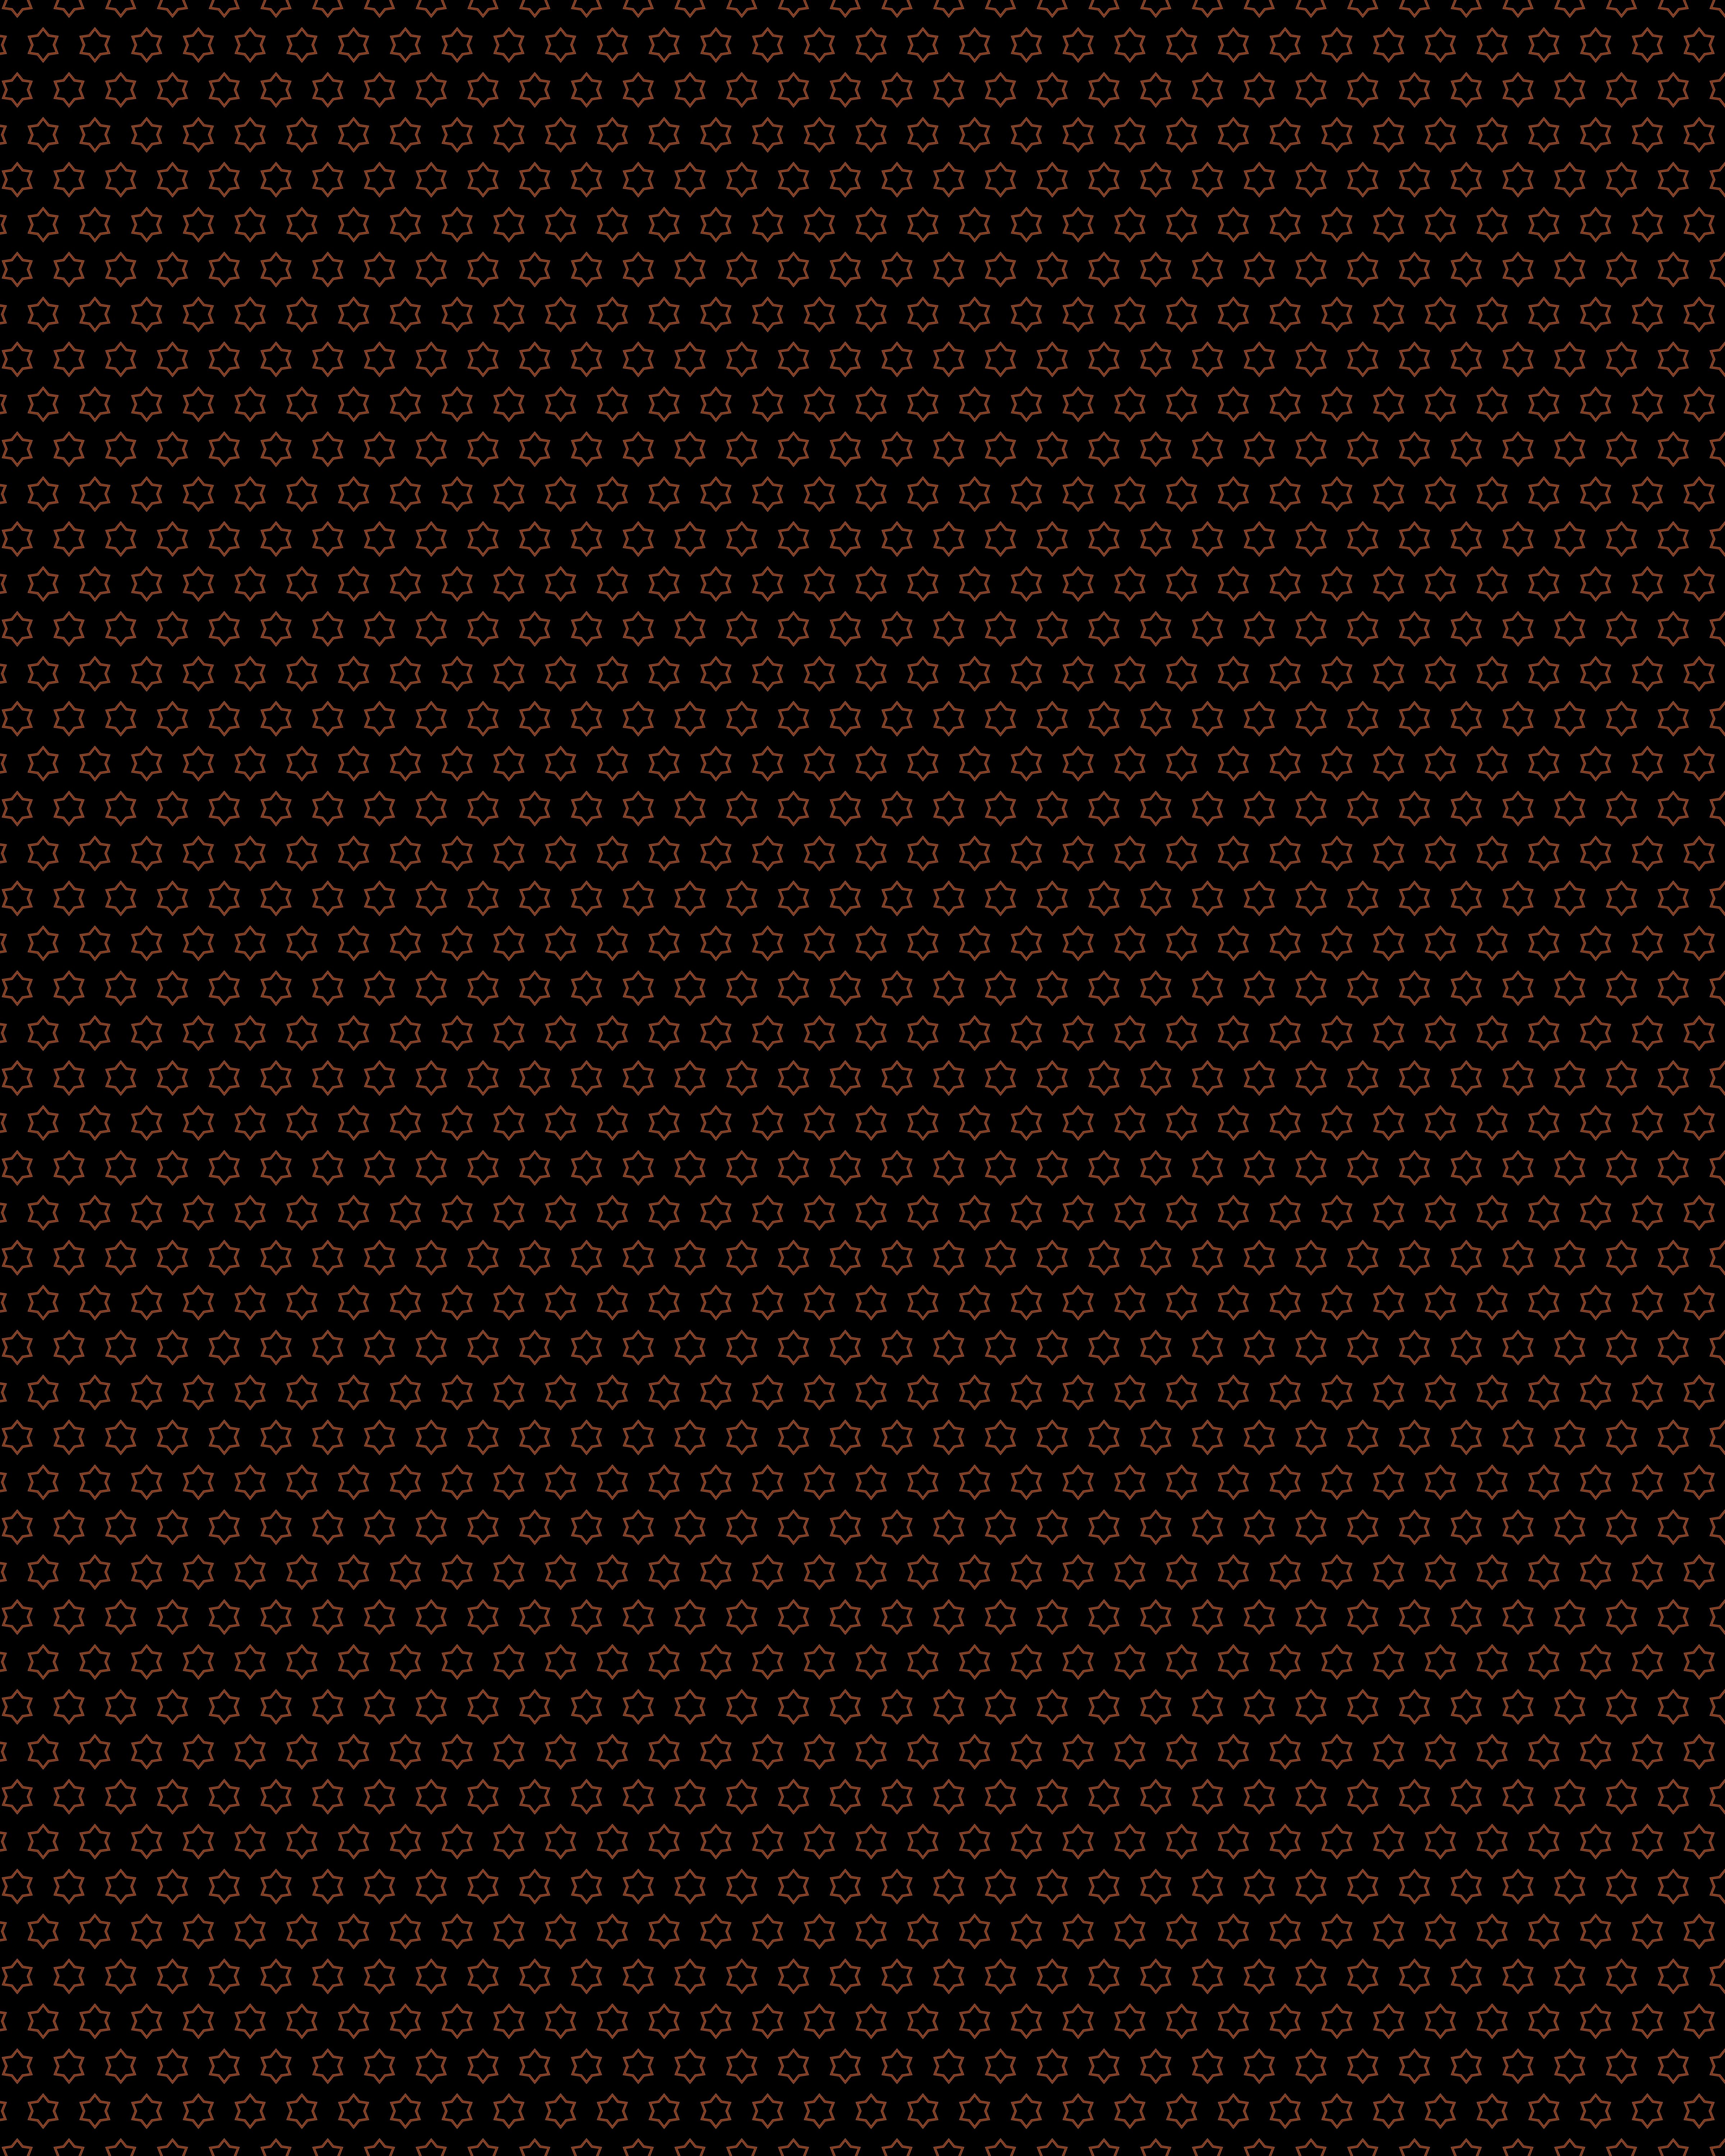 black background, geometric, stars, pattern, texture, textures, brown, shallow, small